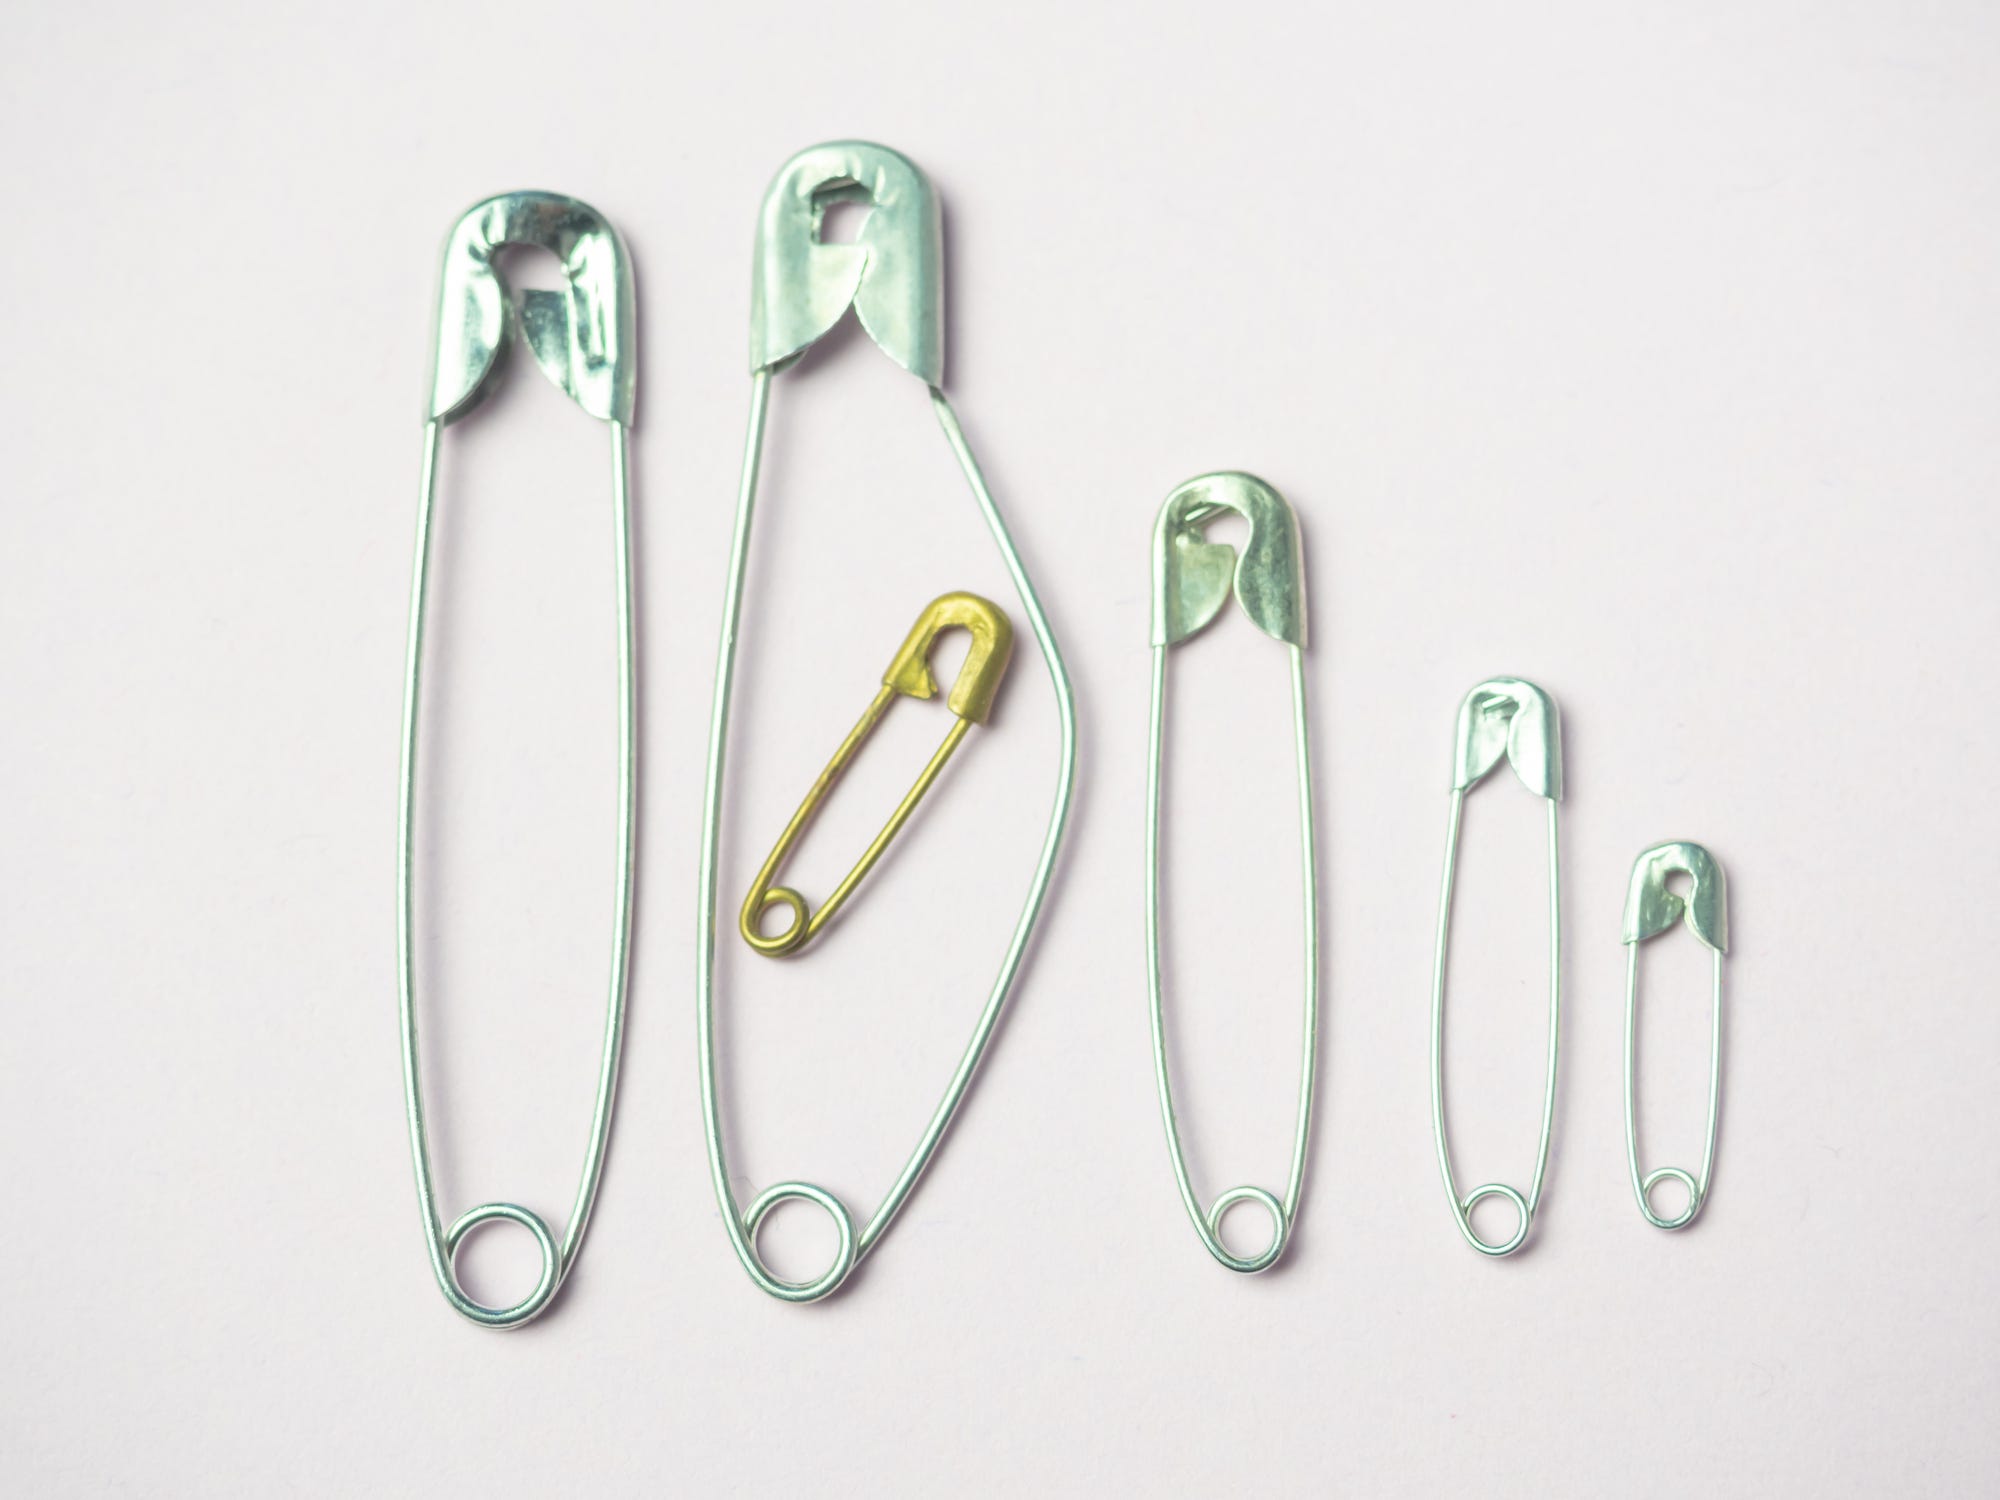 conceptual image with sewing safety pins on white background with space for text